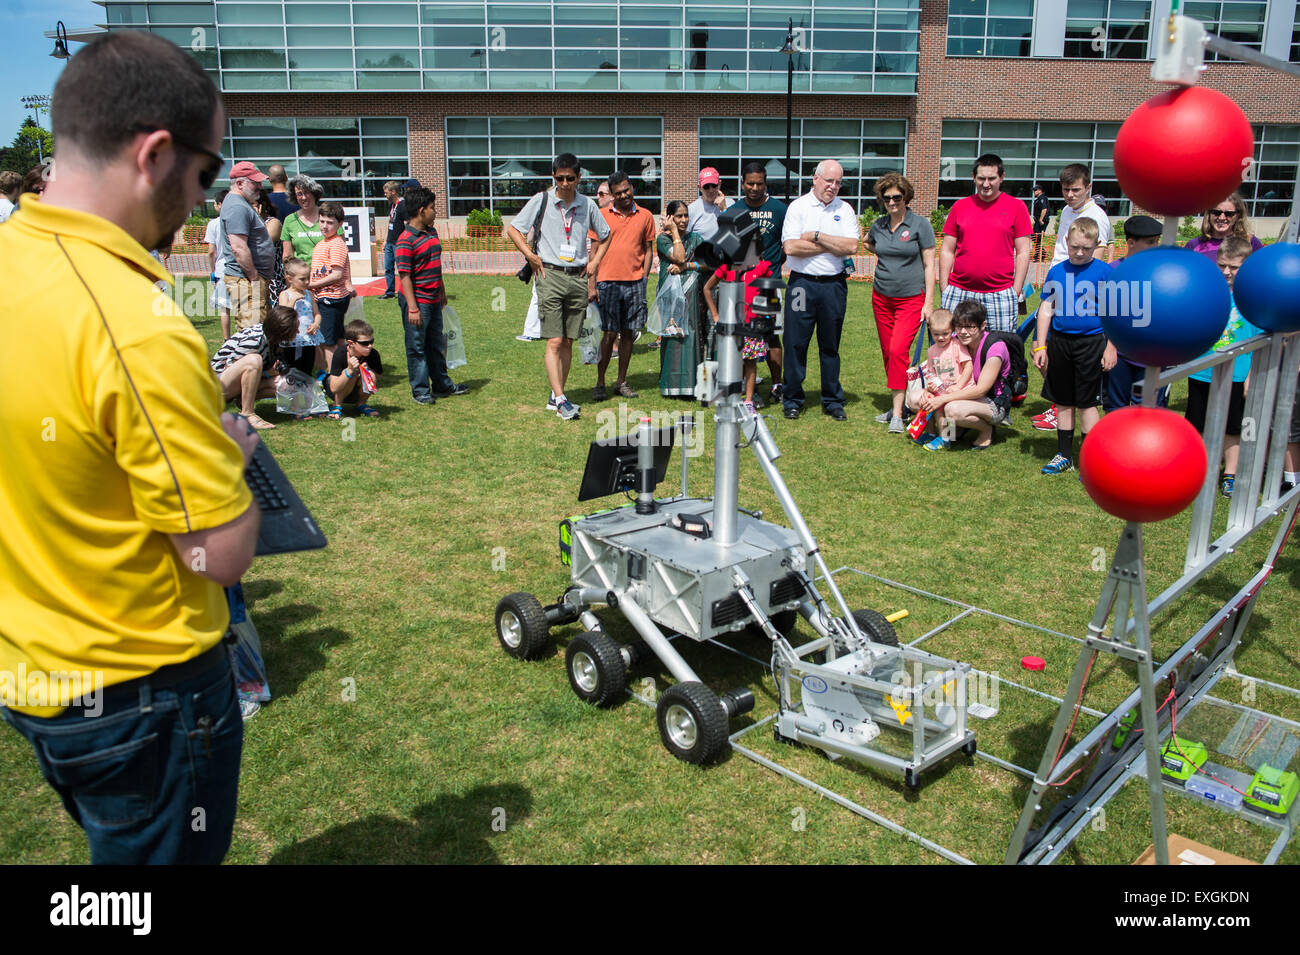 Dennis Andrucyk, deputy associate administrator for the Space Technology Mission Directorate at NASA Headquarters, Worcester Polytechnic Institute (WPI) President Laurie Leshin and other spectators watch as the Mountaineers from West Virginia University demonstrate their robot during the TouchTomorrow Festival, held in conjunction with the 2015 Sample Return Robot Challenge, Saturday, June 13, 2015 at the Worcester Polytechnic Institute (WPI) in Worcester, Mass.  Sixteen teams competed for a $1.5 million NASA prize purse. Teams will be required to demonstrate autonomous robots that can locate  Stock Photo